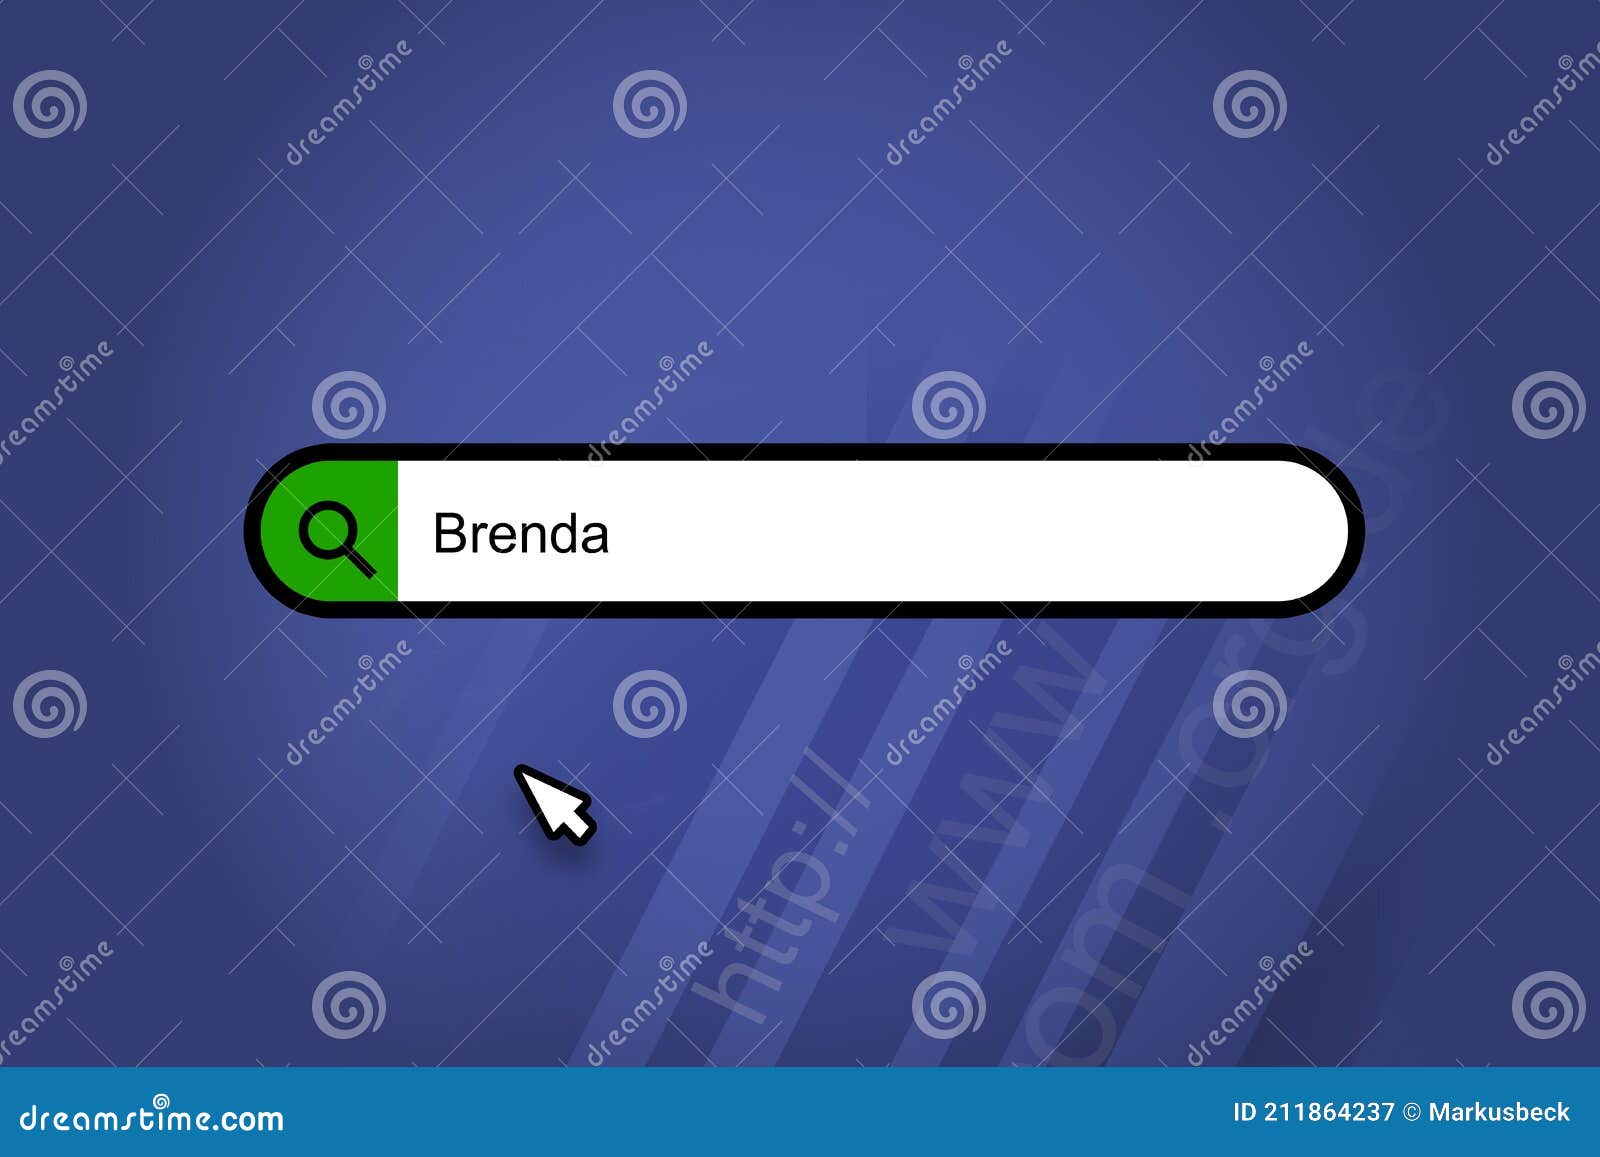 brenda - search engine, search bar with blue background